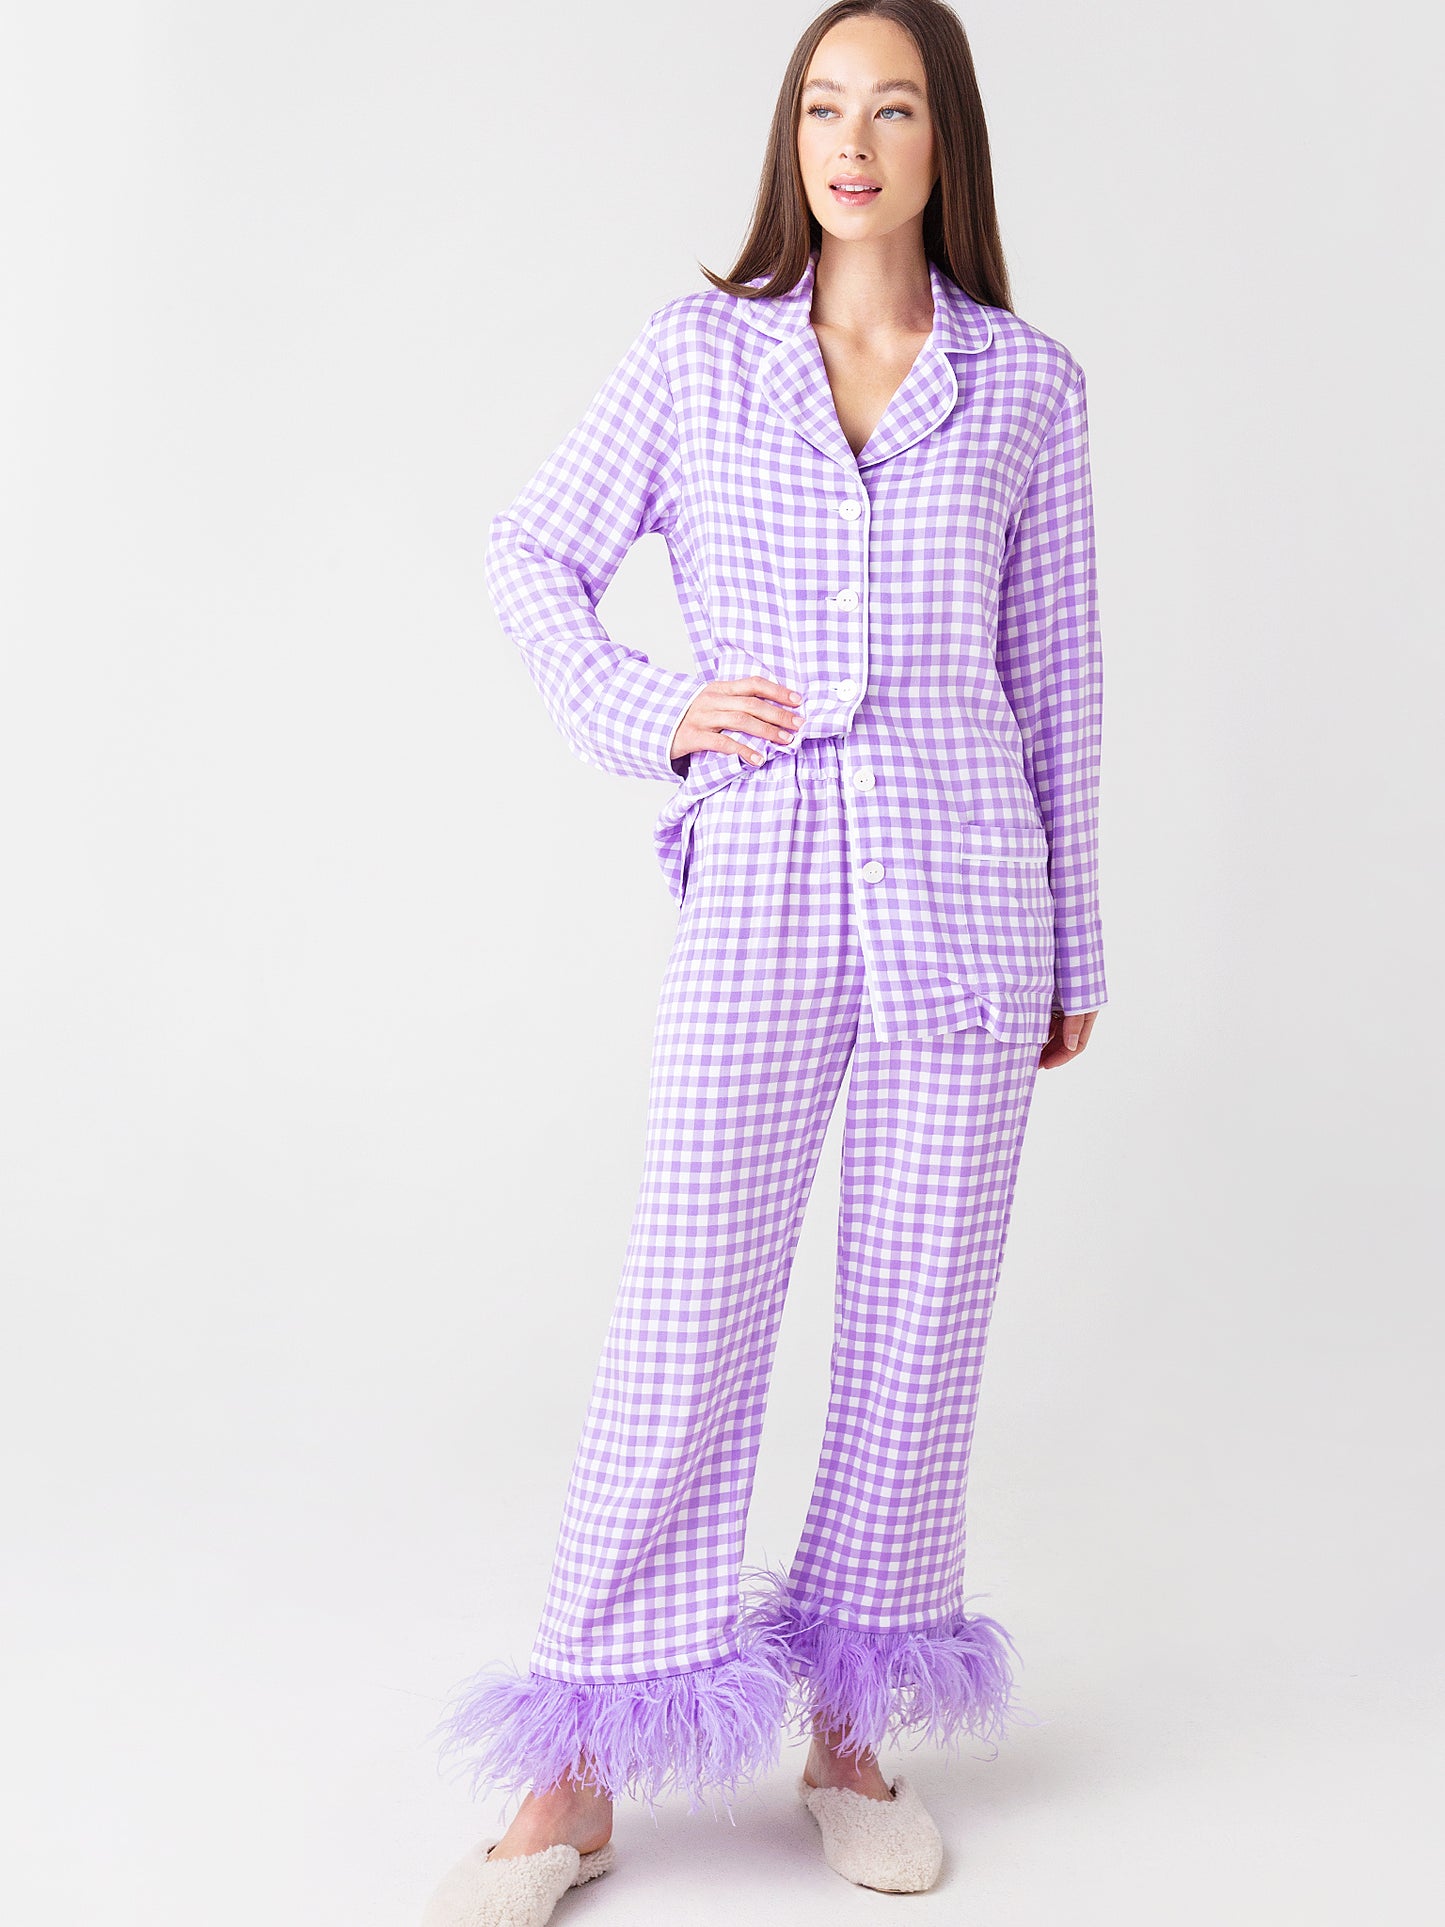 Sleeper Women's Party Pajama Set with Feathers